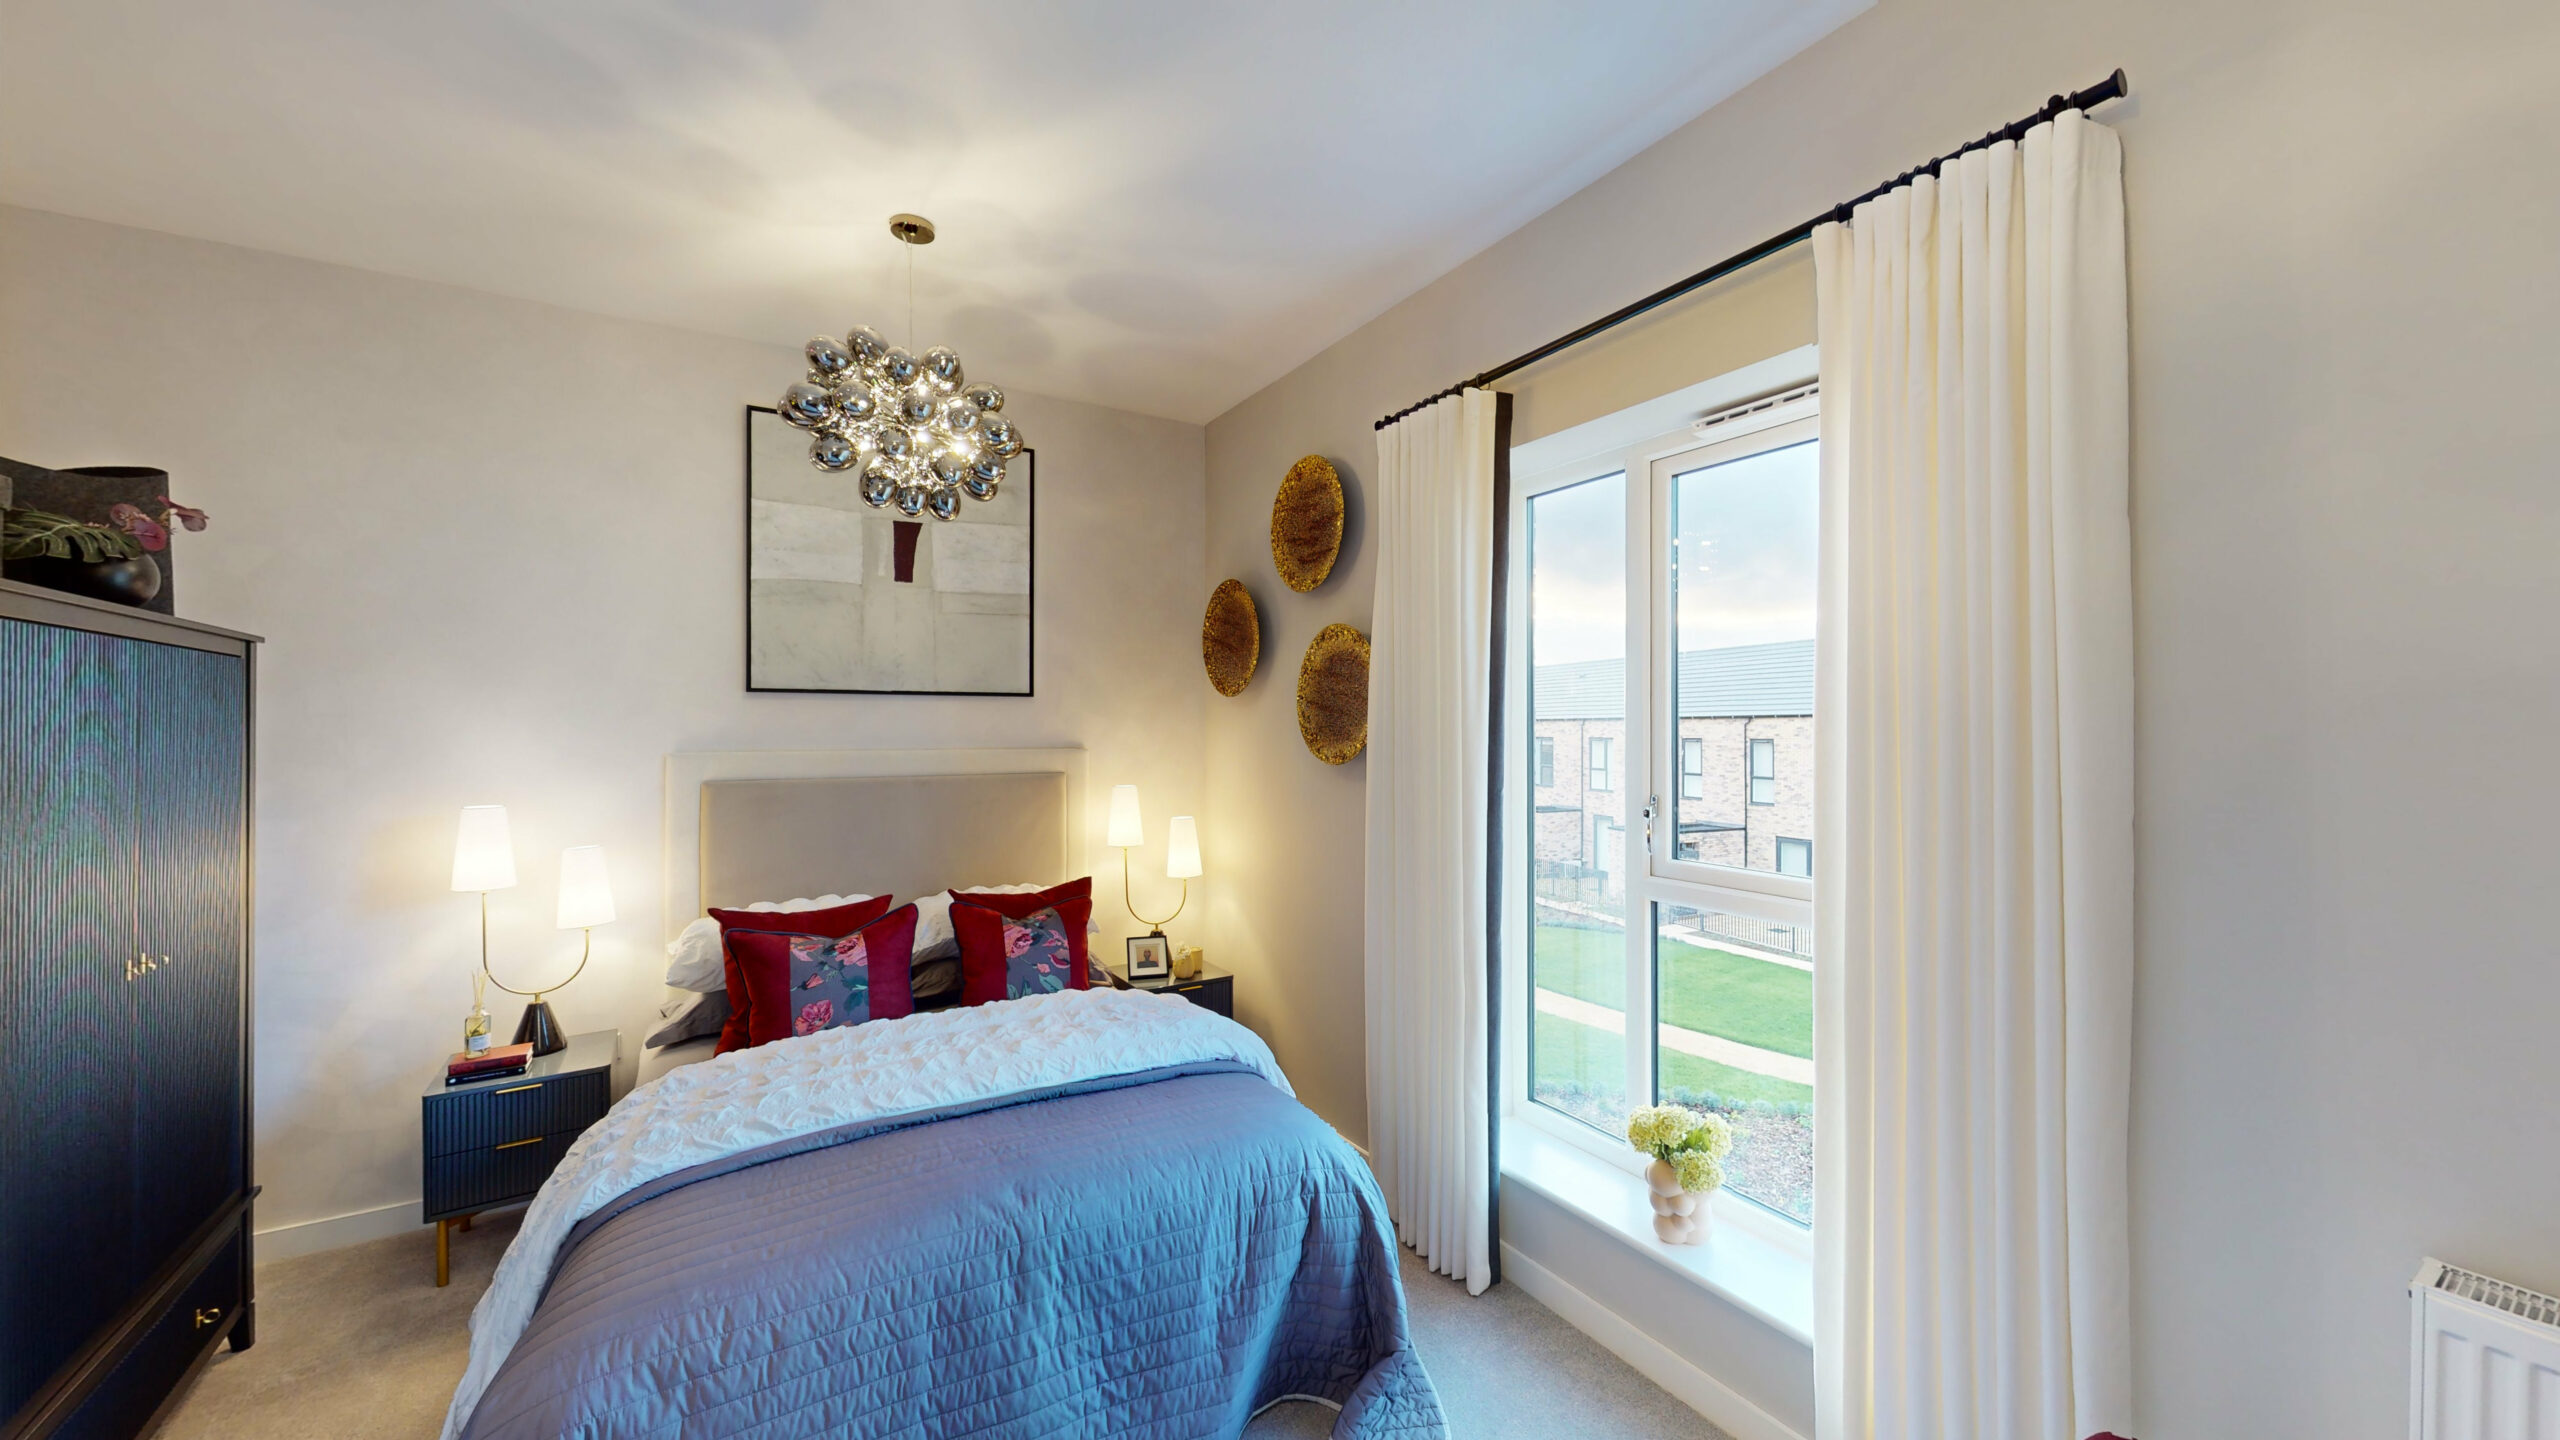 Image of a bedroom at the Belgrave Village development from Connells - available to purchase through Shared Ownership on Share to Buy!